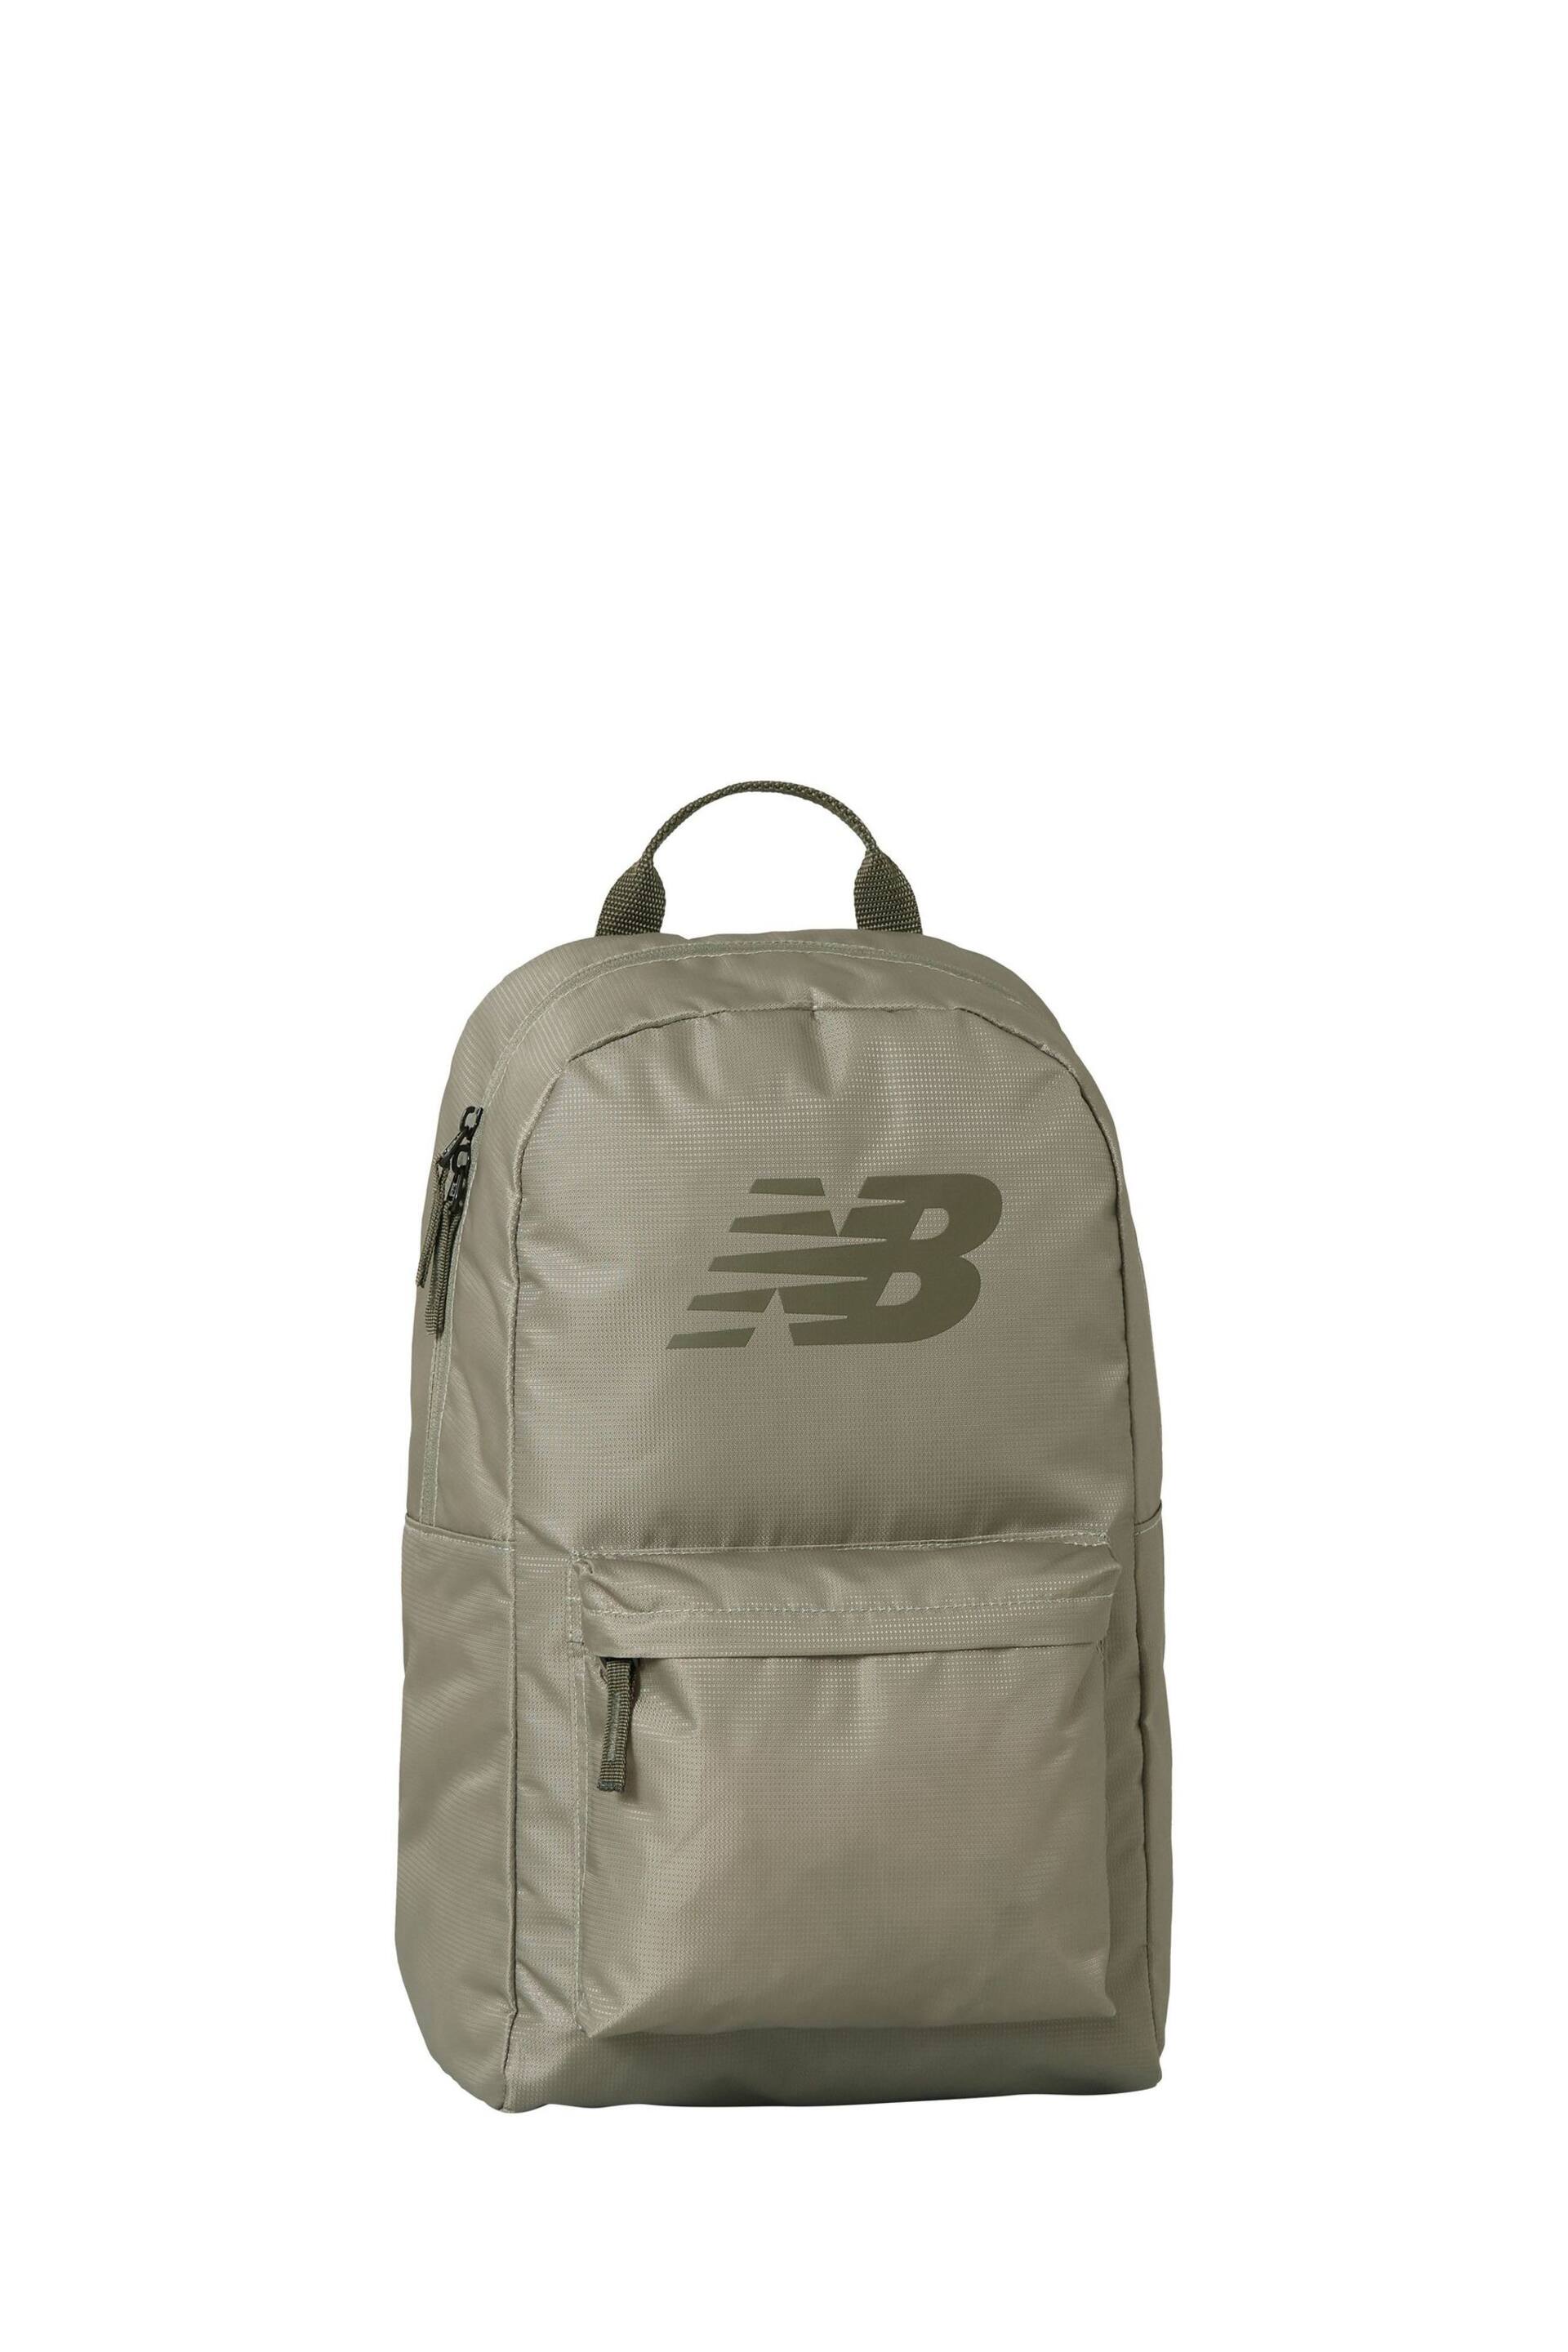 New Balance Green Opp Core Performance Backpack - Image 1 of 4